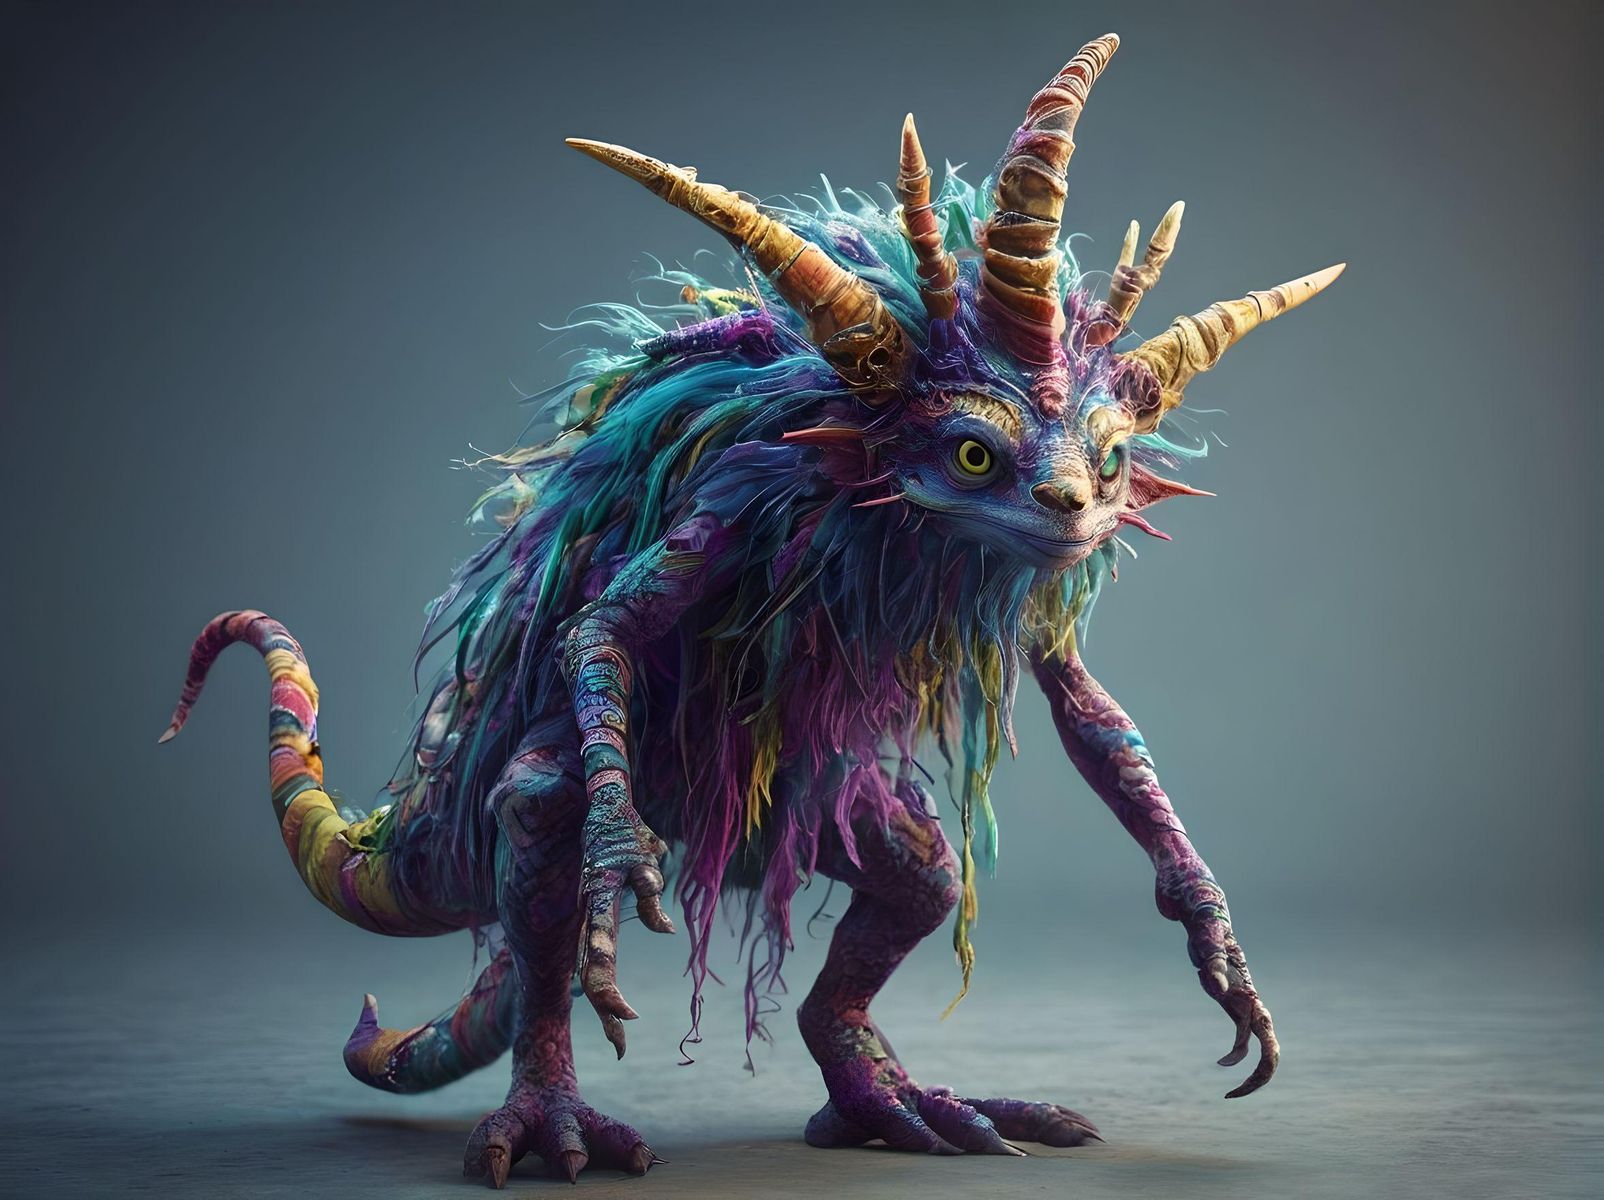 enchanting world of whimsical and legendary monsters, Magical Creature. artistic. gorgeous. 
The image displays a fictional whimsical character with long tails. funny animal. weird animal. fictional animal. The style is abstract and playful
